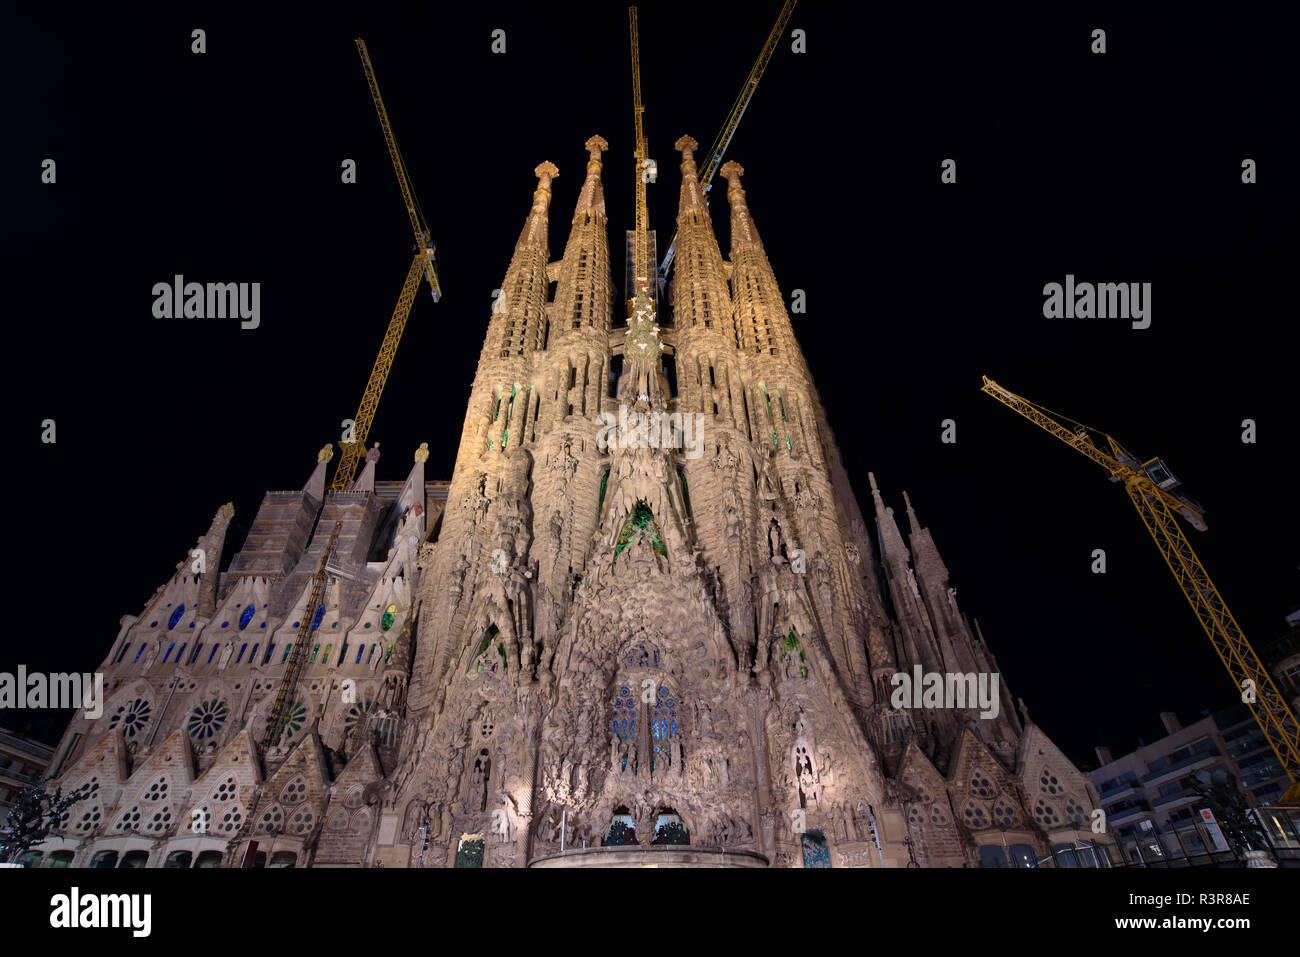 Night view of Nativity Façade of Sagrada Familia, the cathedral designed by Gaudi in Barcelona, Spain Stock Photo